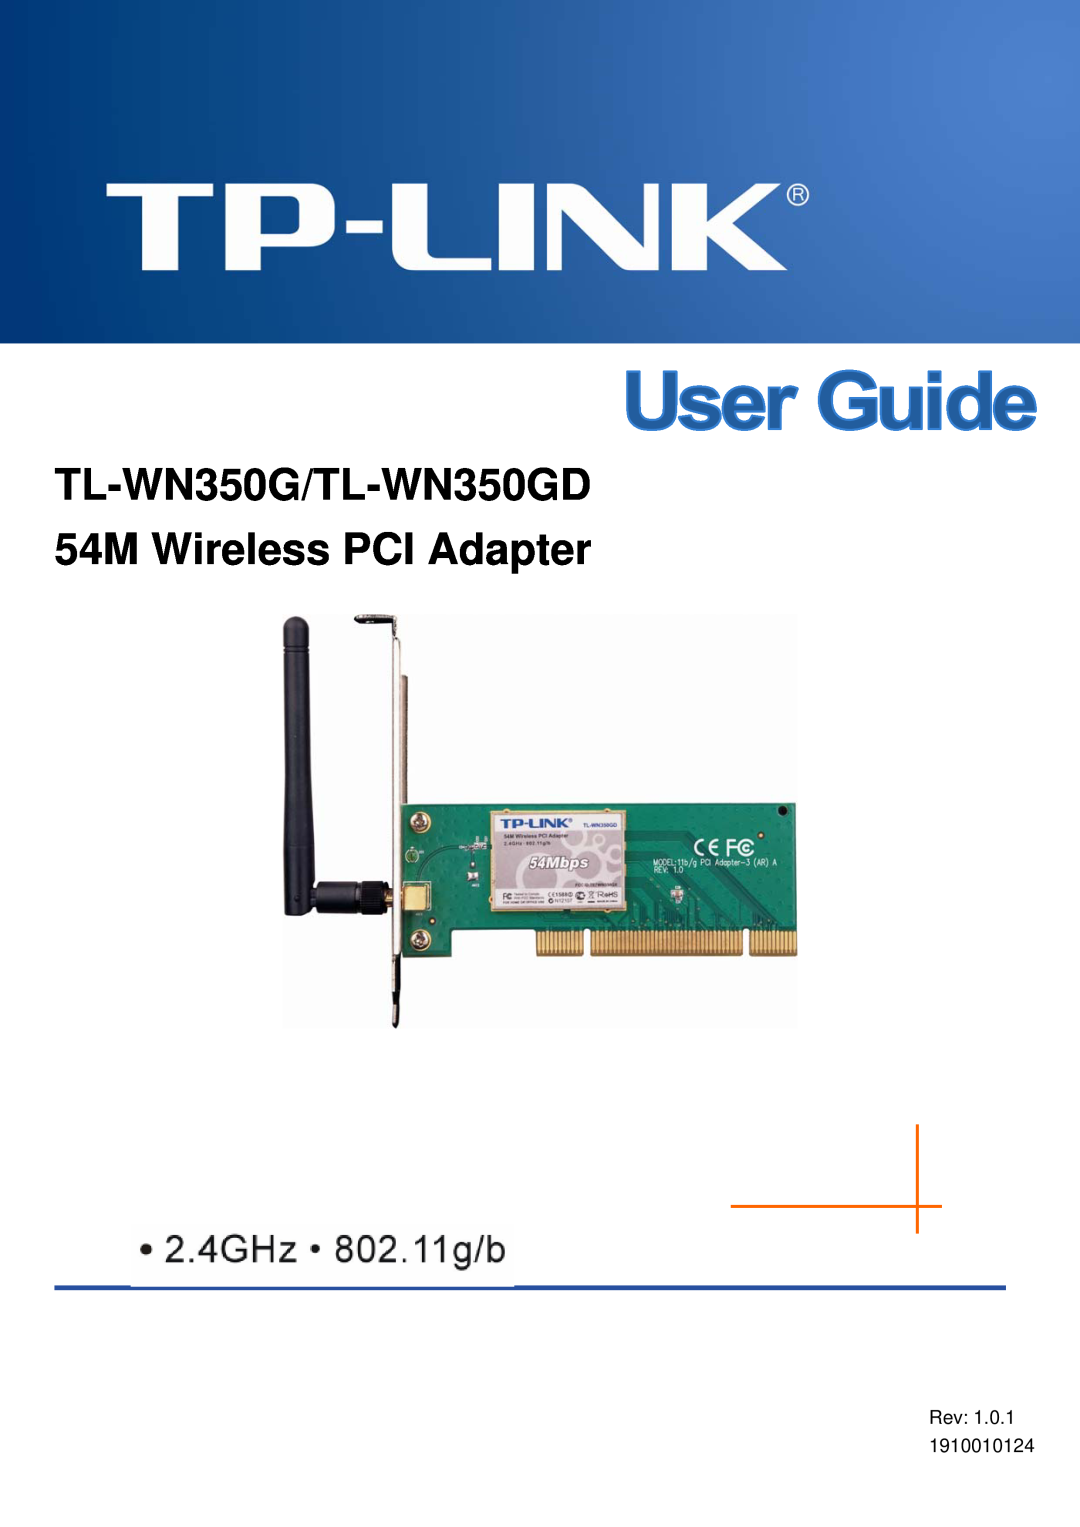 TP-Link manual 54M Wireless PCI Adapter User Guide, TL-WN350G/TL-WN350GD 54M Wireless PCI Adapter 